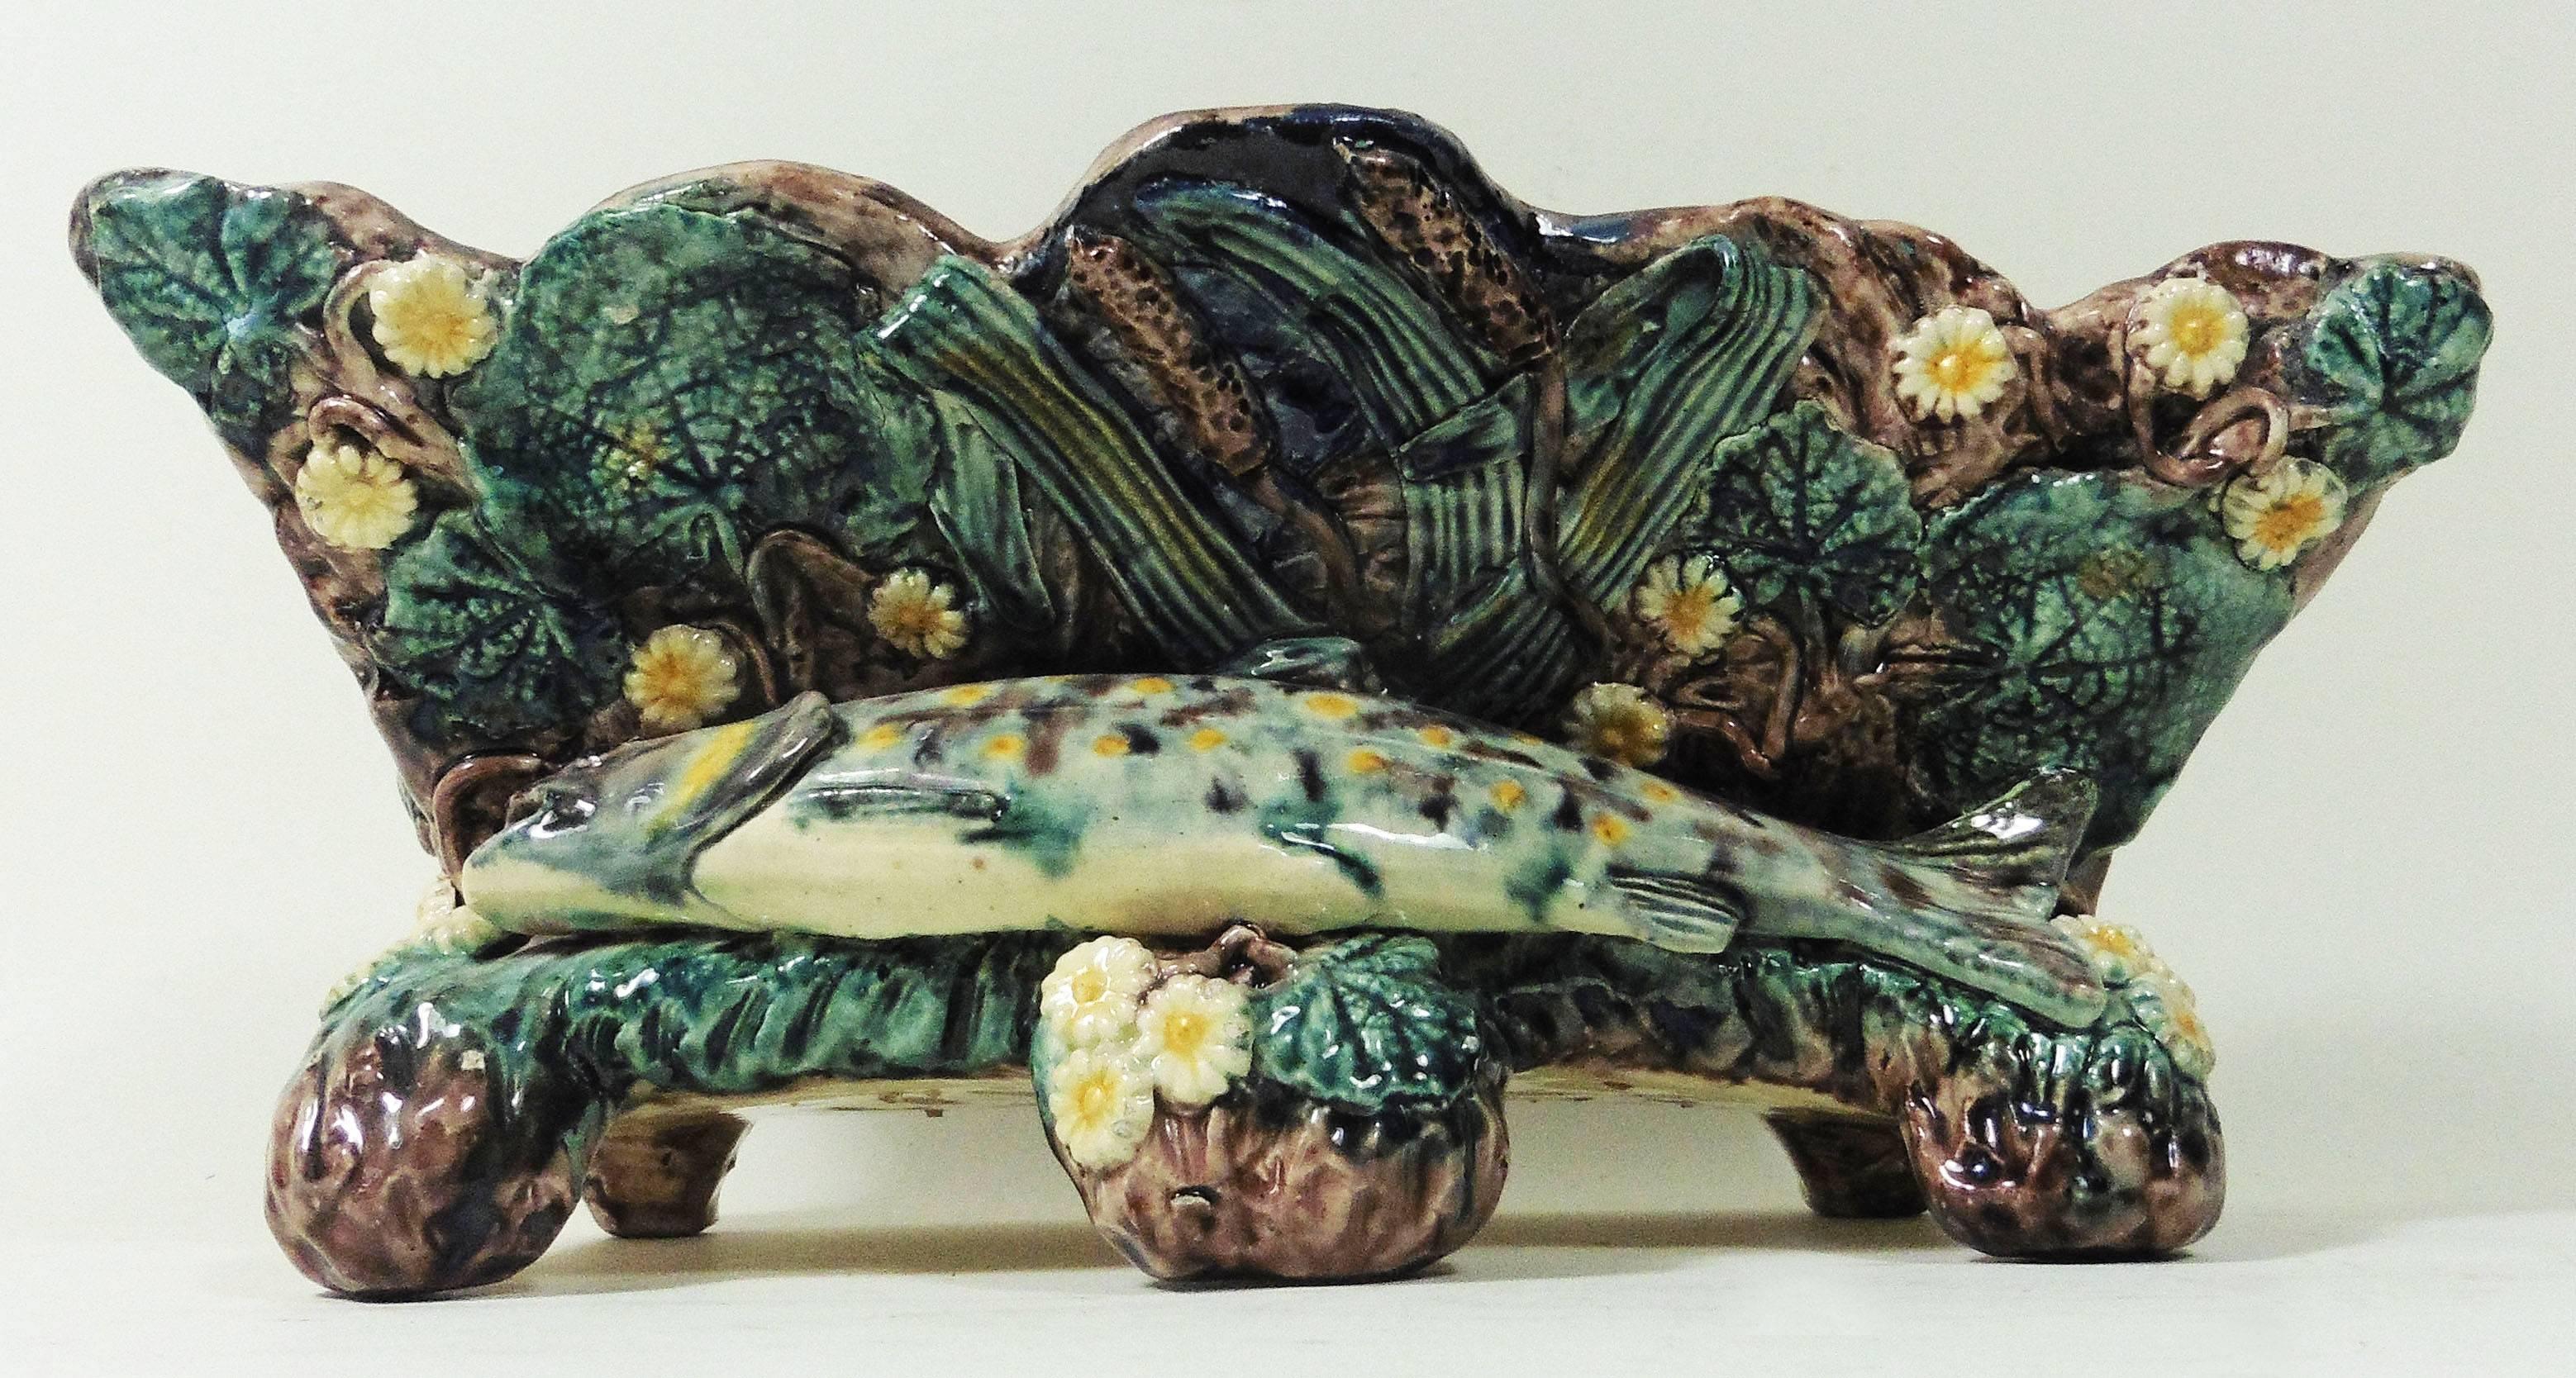 19th century Palissy footed wood box jardiniere School of Paris.
A large spotted fish on the front of the jardiniere surrounded by leaves and white daisies.
The School of Paris was composed by makers as Victor Barbizet, Francois Maurice, Thomas